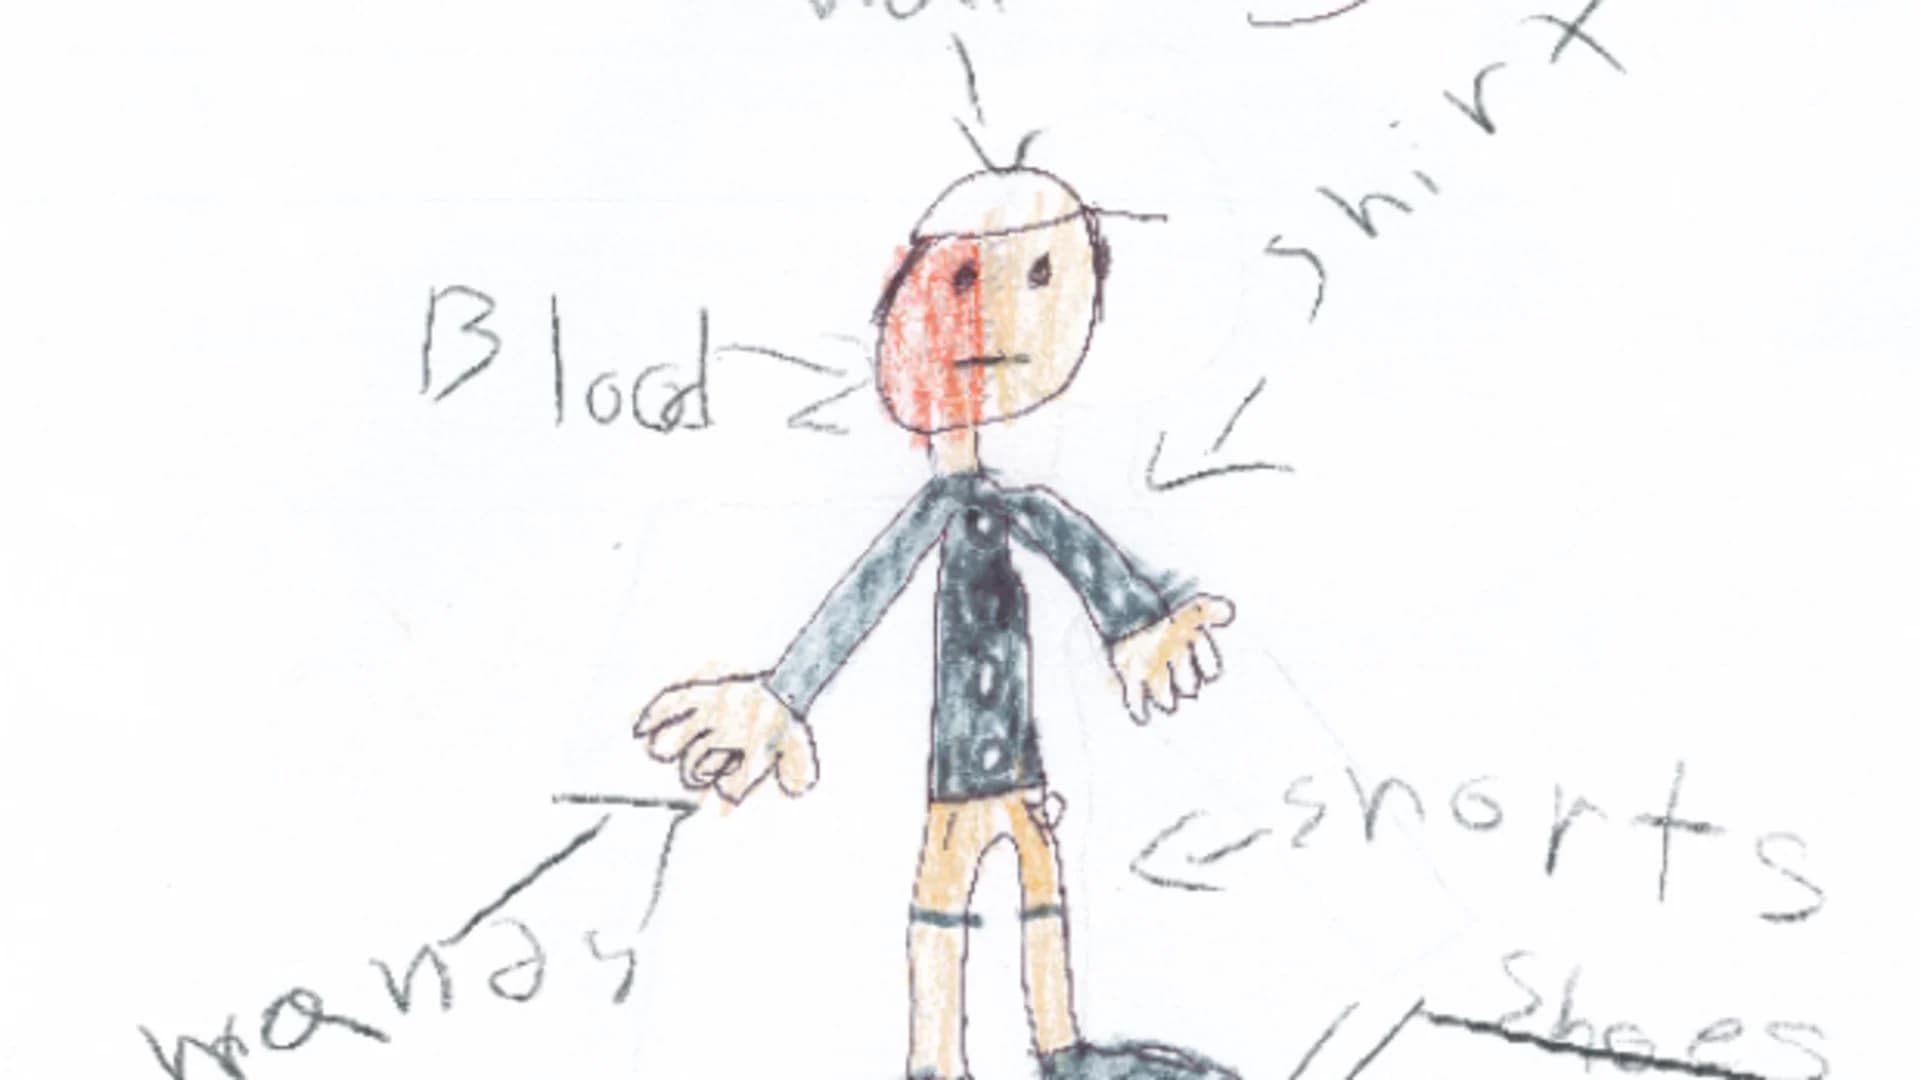 Kids draw 'bad guy' to help police catch motorcyclist who fled crash